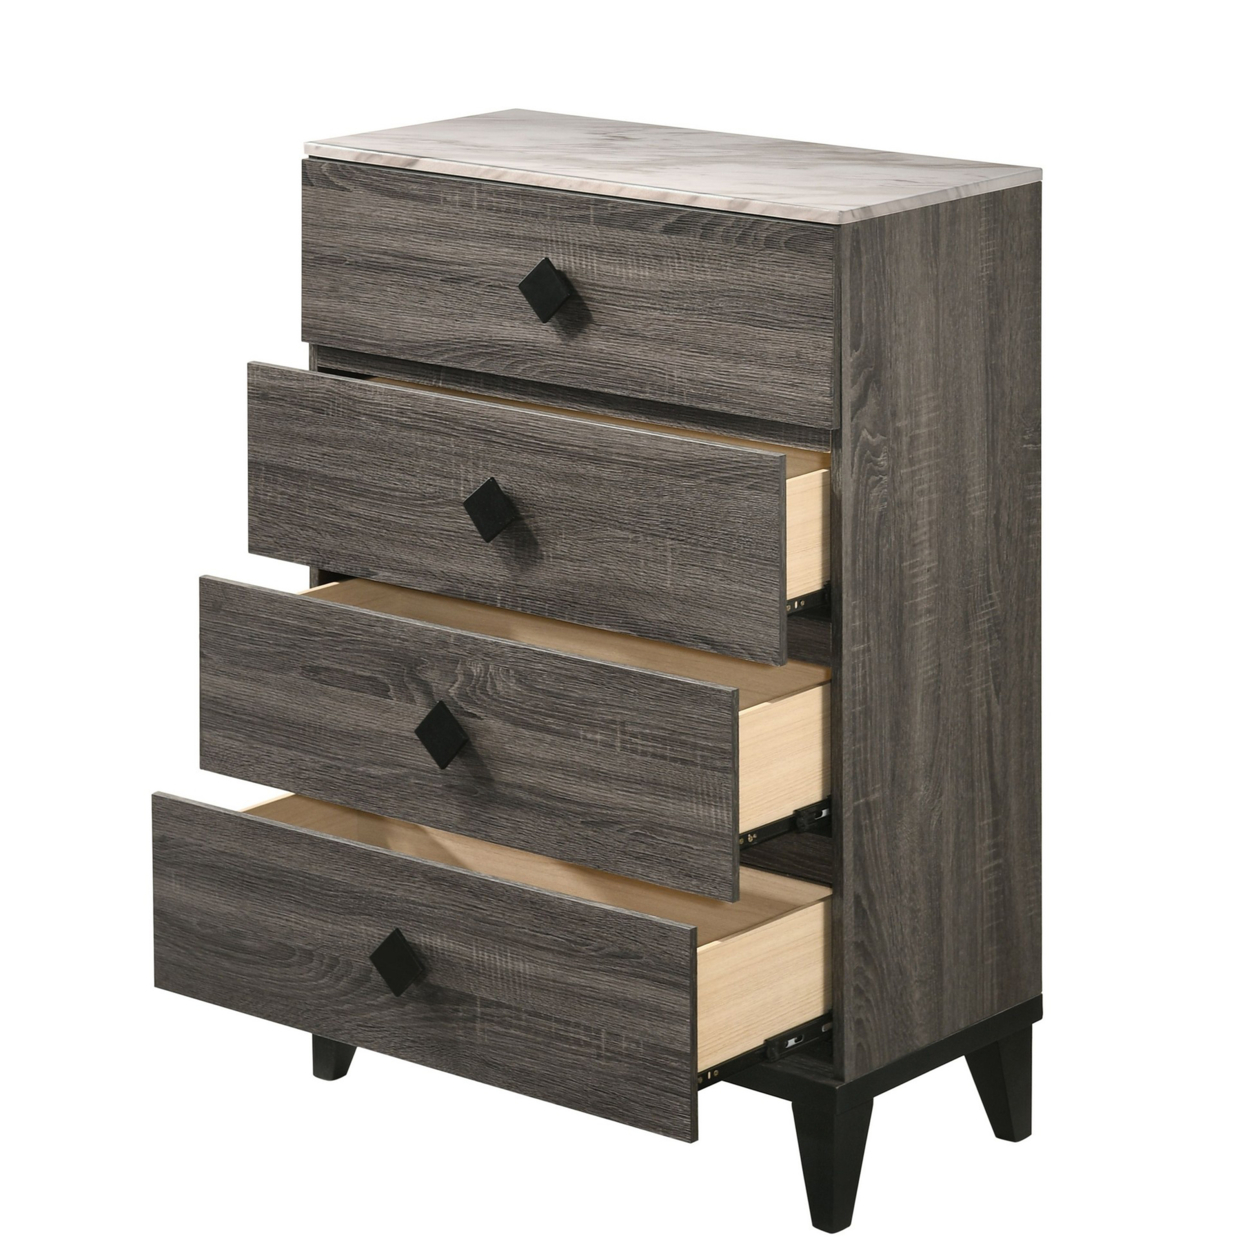 5 Drawer Wooden Chest With Diamond Metal Knobs, Gray And Black- Saltoro Sherpi